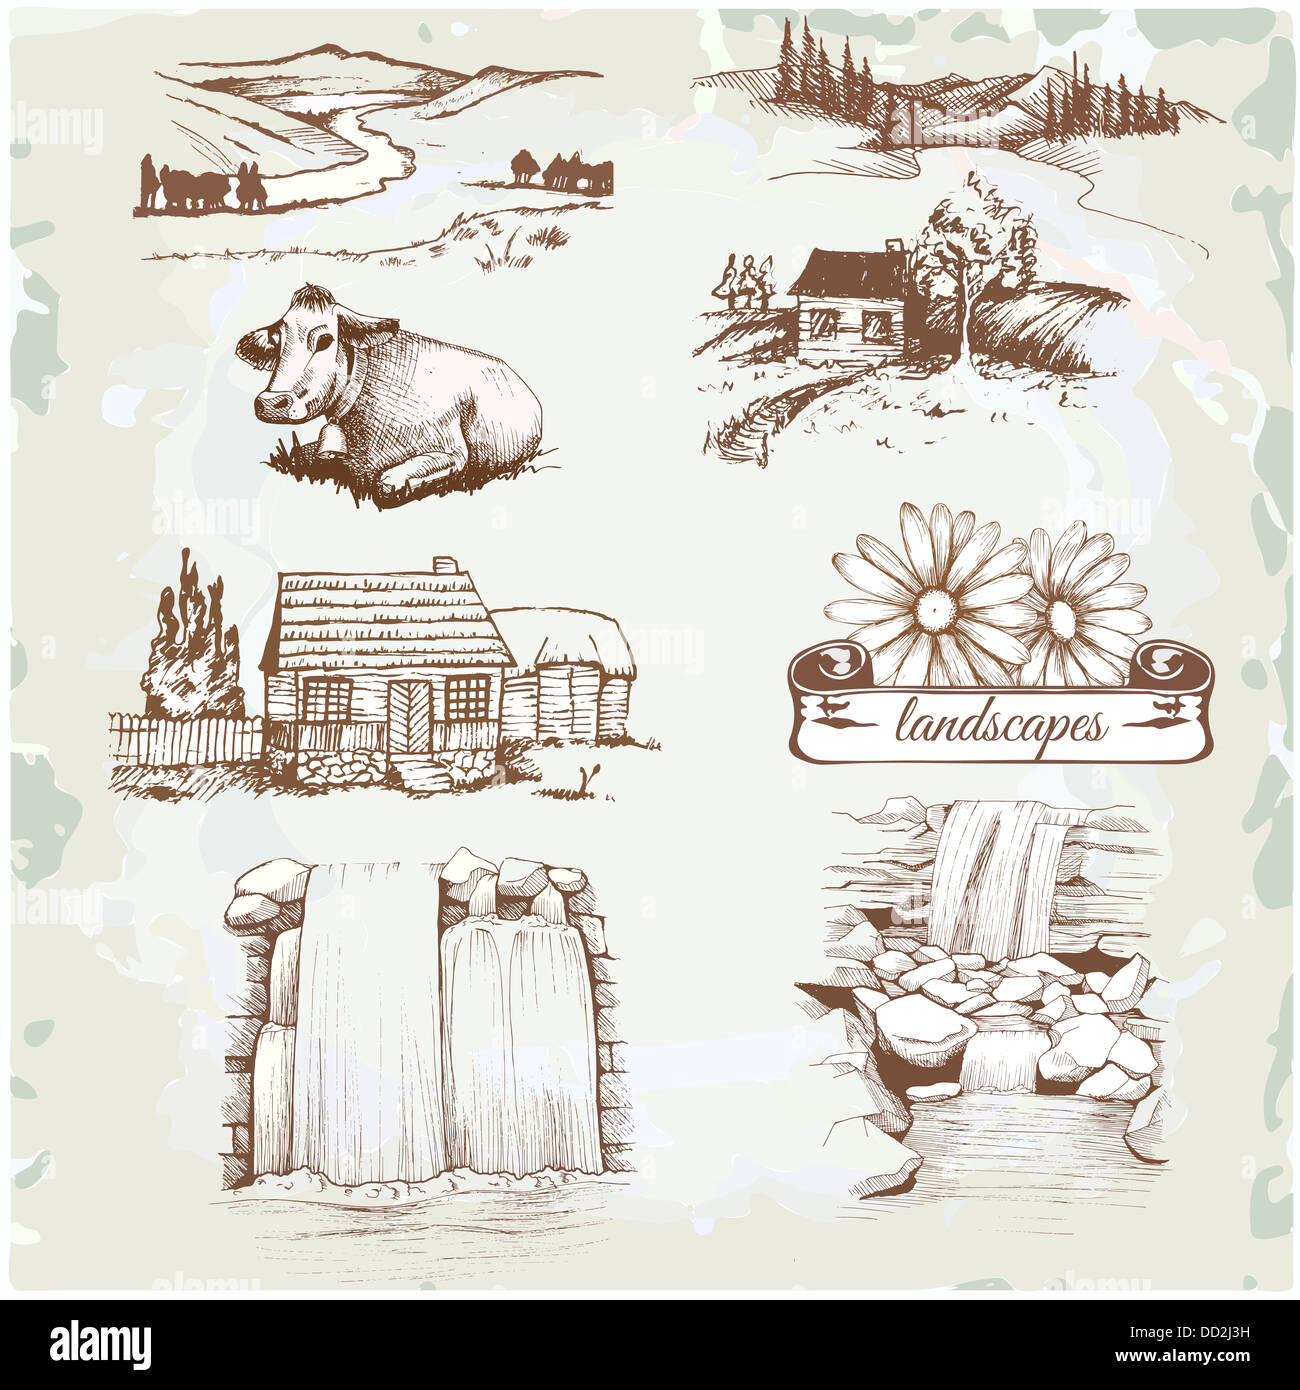 landscape, agriculture, farming, sketch drawing Stock Photo